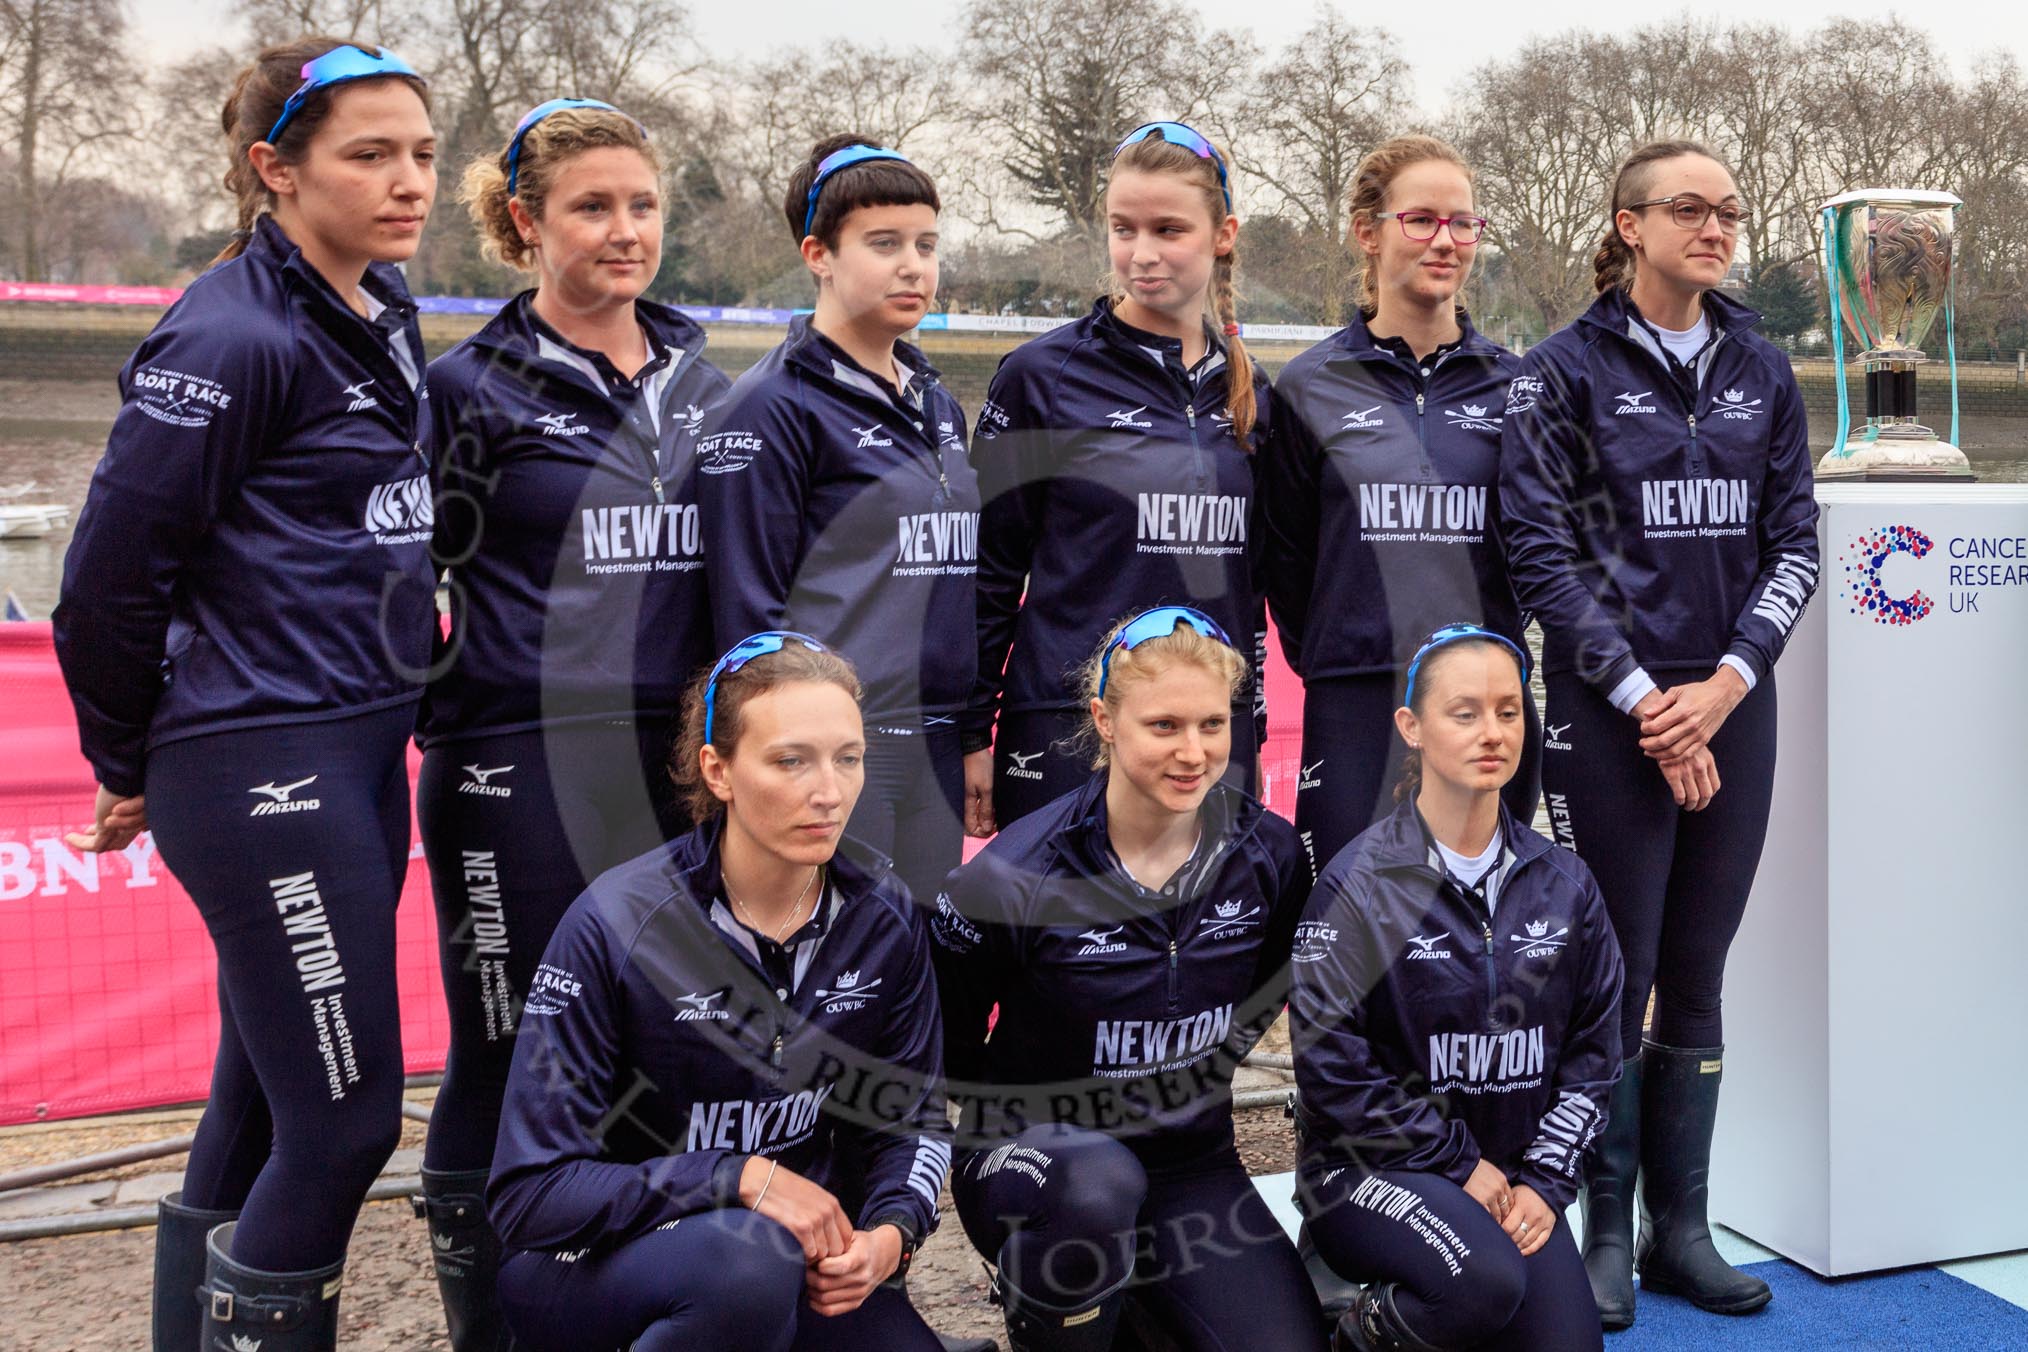 The Cancer Research UK Women's Boat Race 2018: The Oxford Blue Boat crew after the toss -  6 Sara Kushma, 5 Morgan McGovern, 4 Alice Roberts, 3 Juliette Perry, 2 - Katherine Erickson, bow Renée Koolschijn, 7 Abigail Killen, stroke Beth Bridgman, and cox Jessica Buck.
River Thames between Putney Bridge and Mortlake,
London SW15,

United Kingdom,
on 24 March 2018 at 14:42, image #57